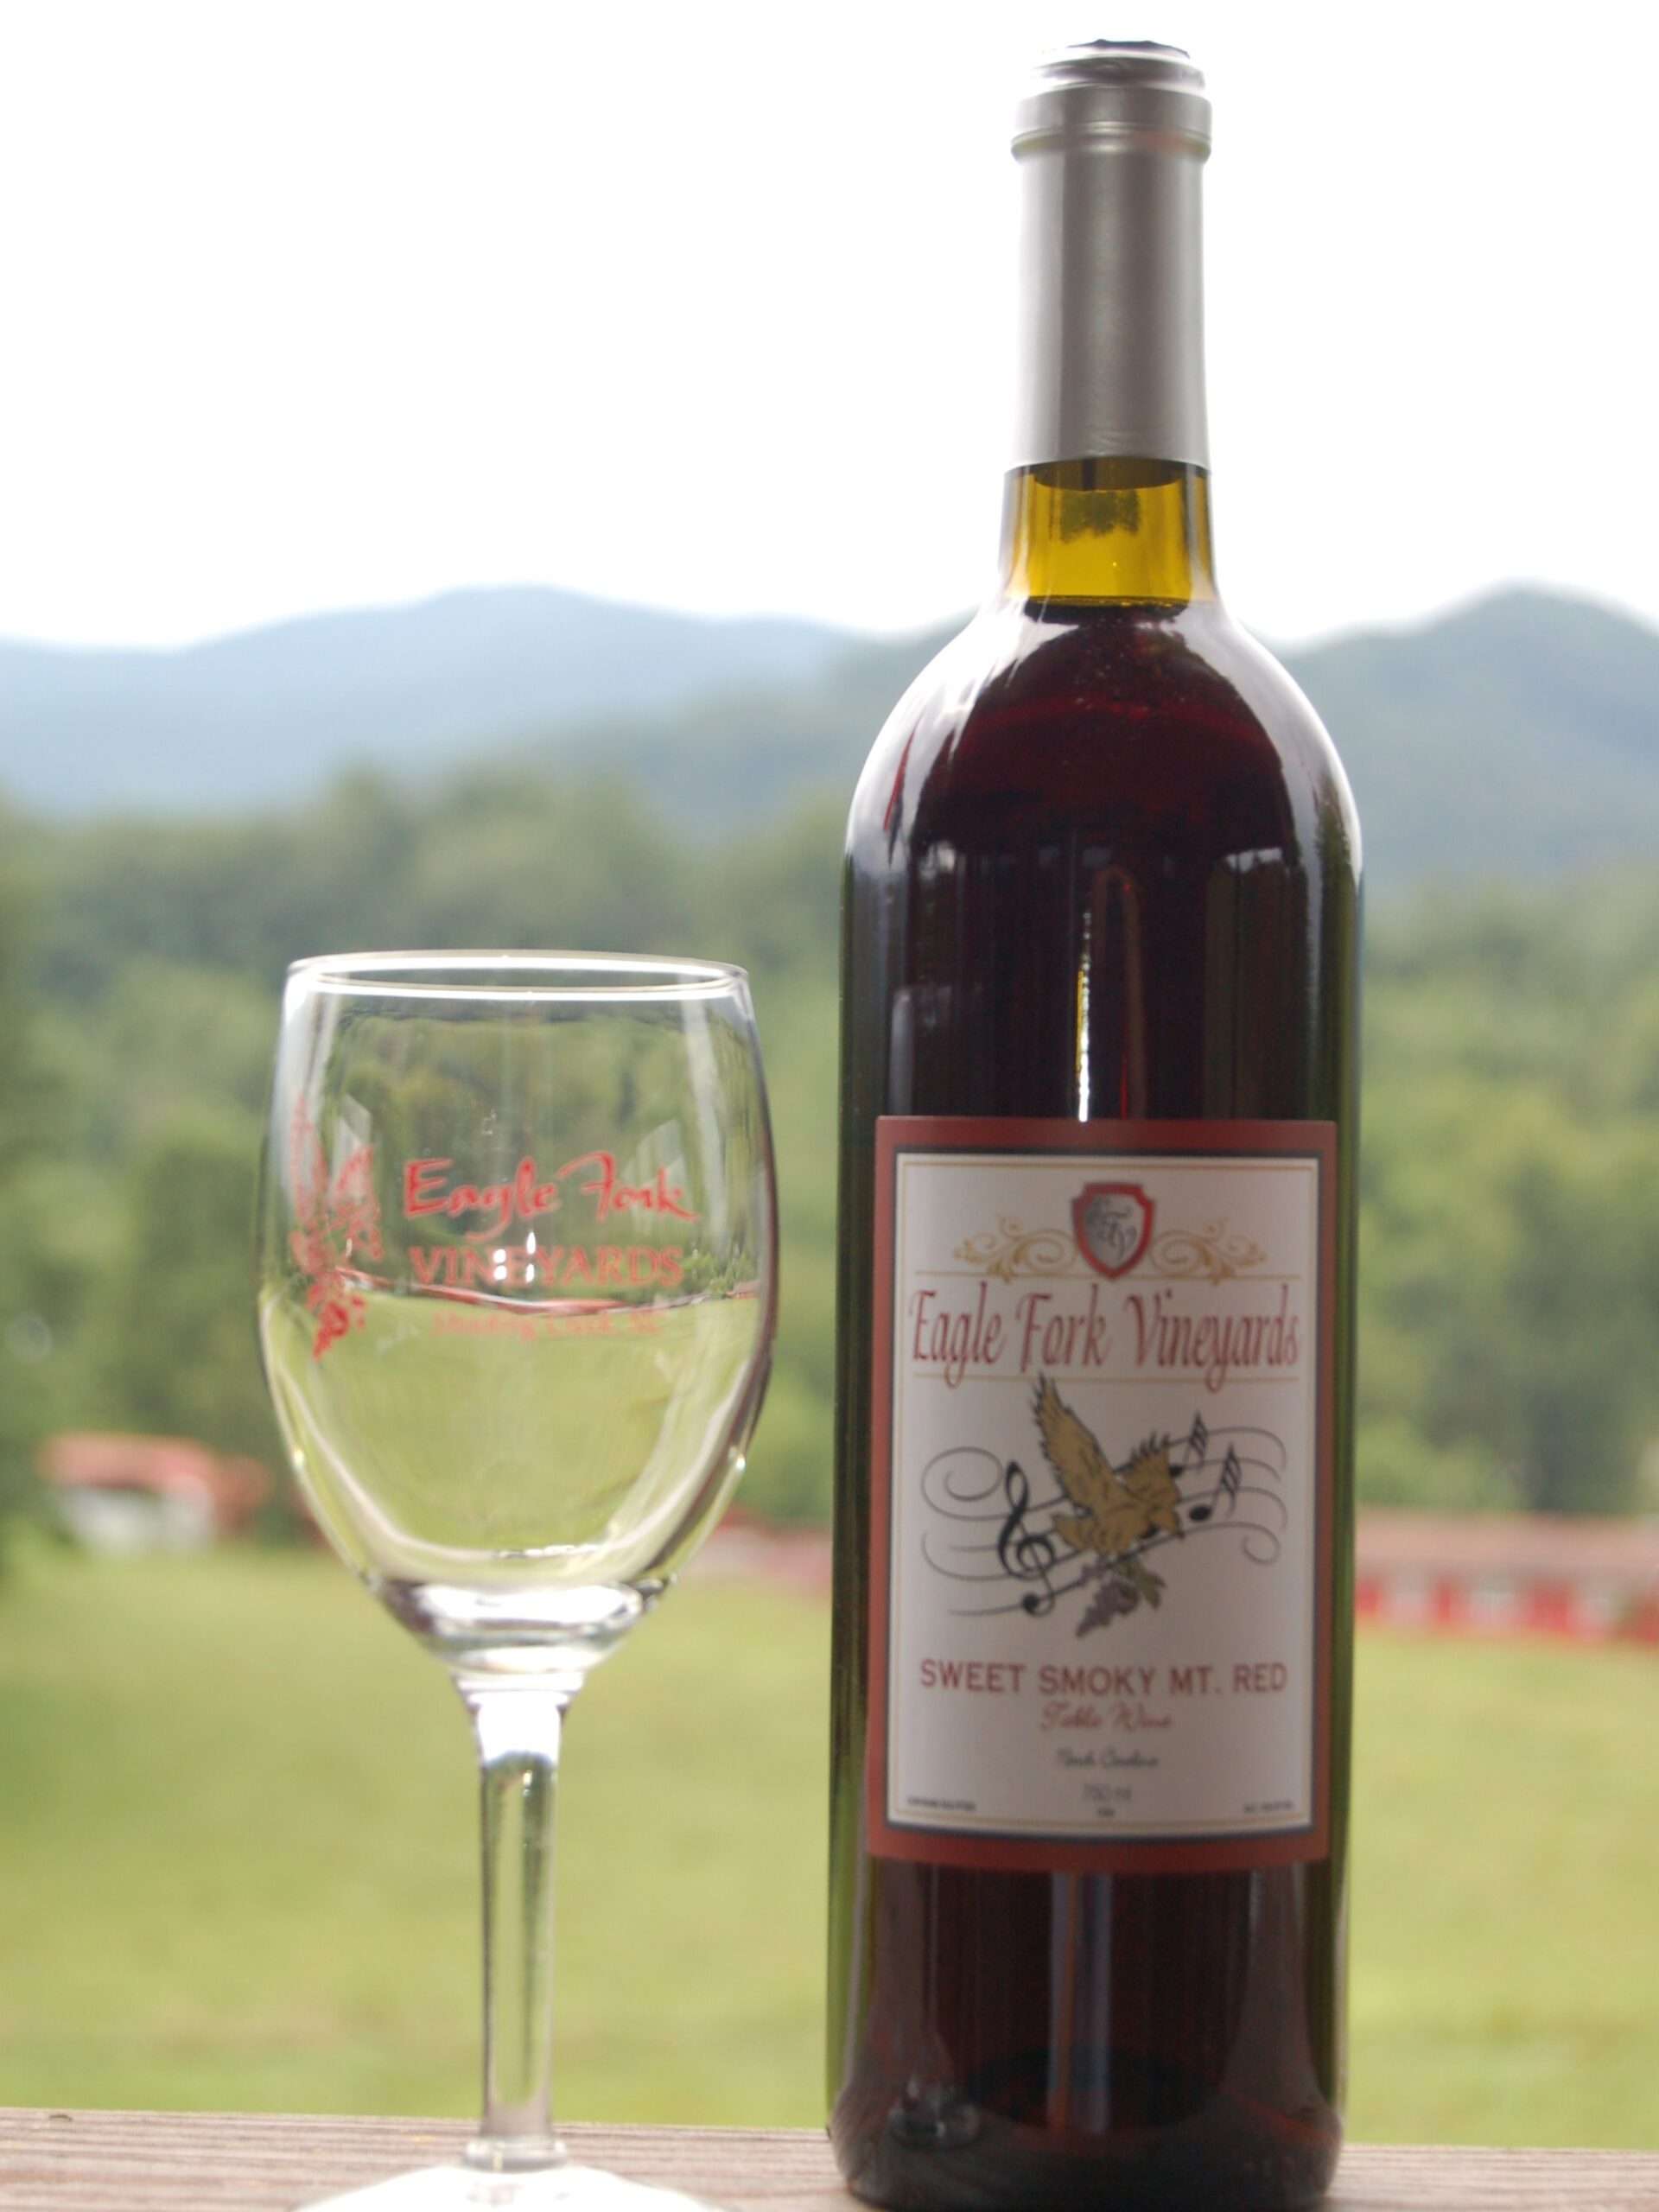 Before tasting this wine, breath deeply into the delicate fruity aroma that delights both the nose and the palate at the same time. Made from the American Concord grape, its sweet flavor will make a believer out of even the most discriminating wine drinker.